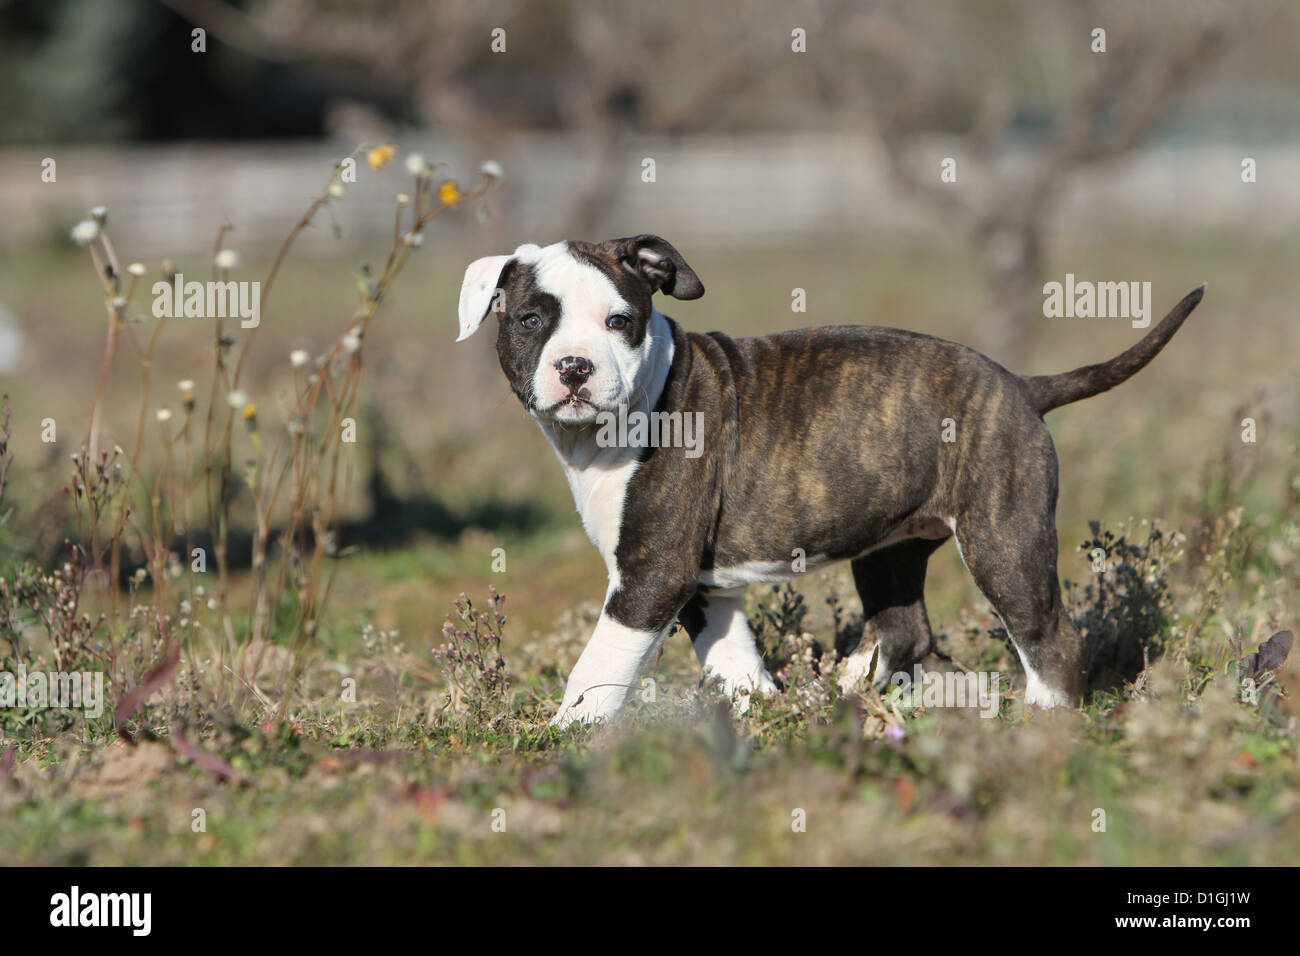 Dog American Staffordshire Terrier puppy standing Stock Photo